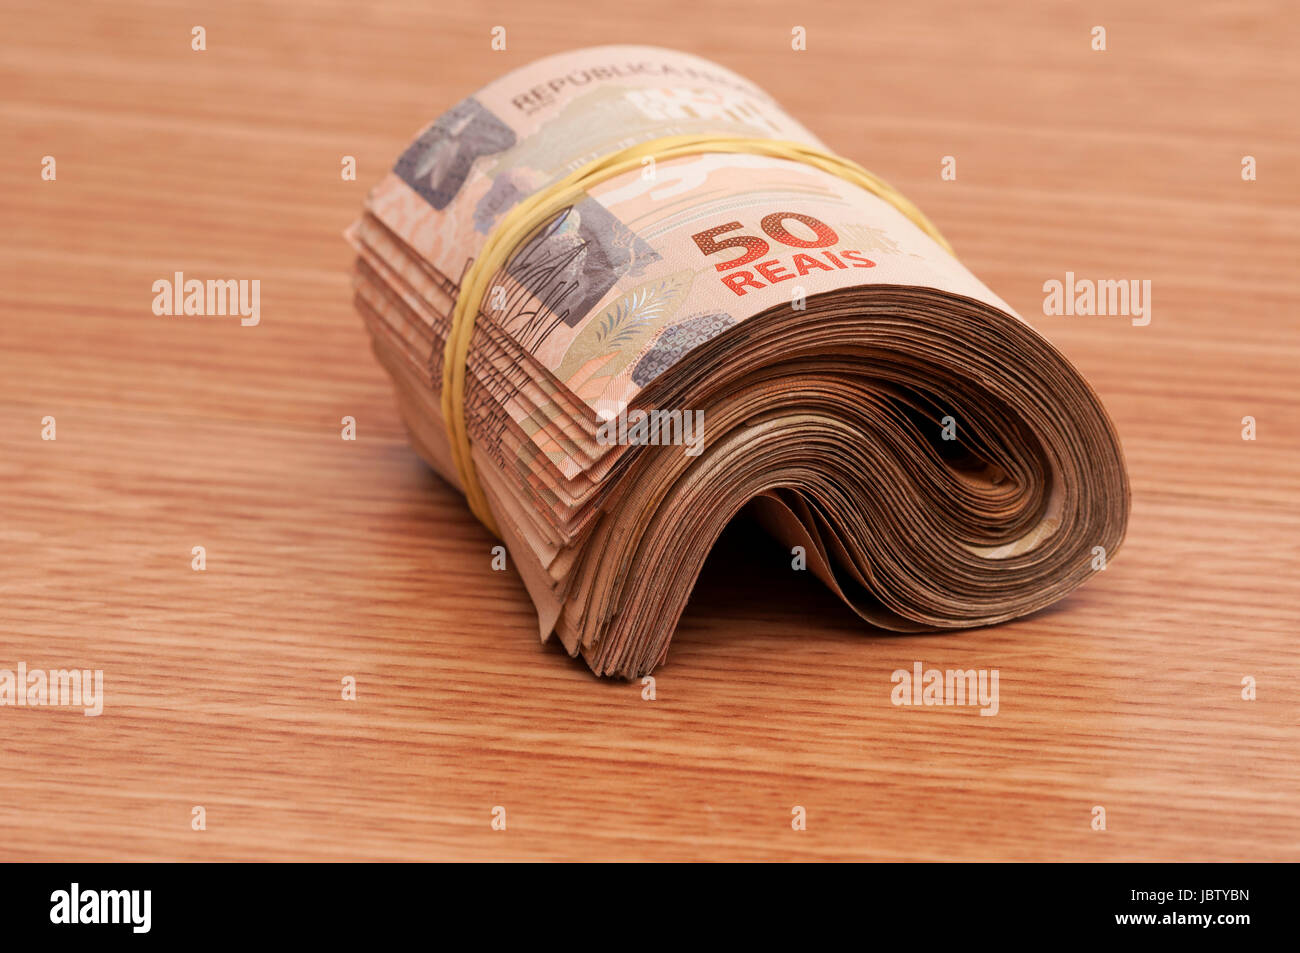 A few bills of brazilian currency (real) Stock Photo